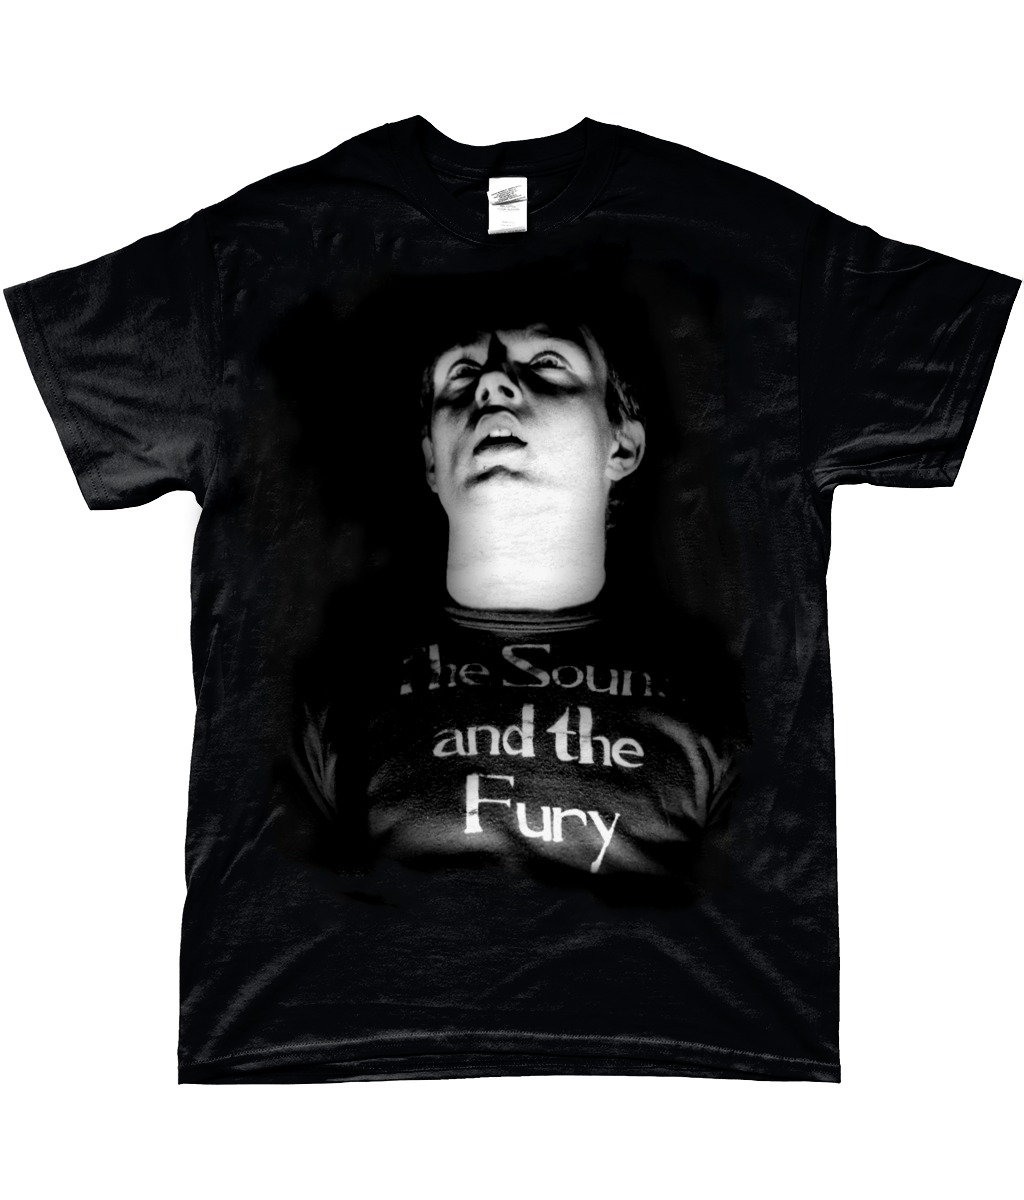 IAN CURTIS - The Sound and the Fury